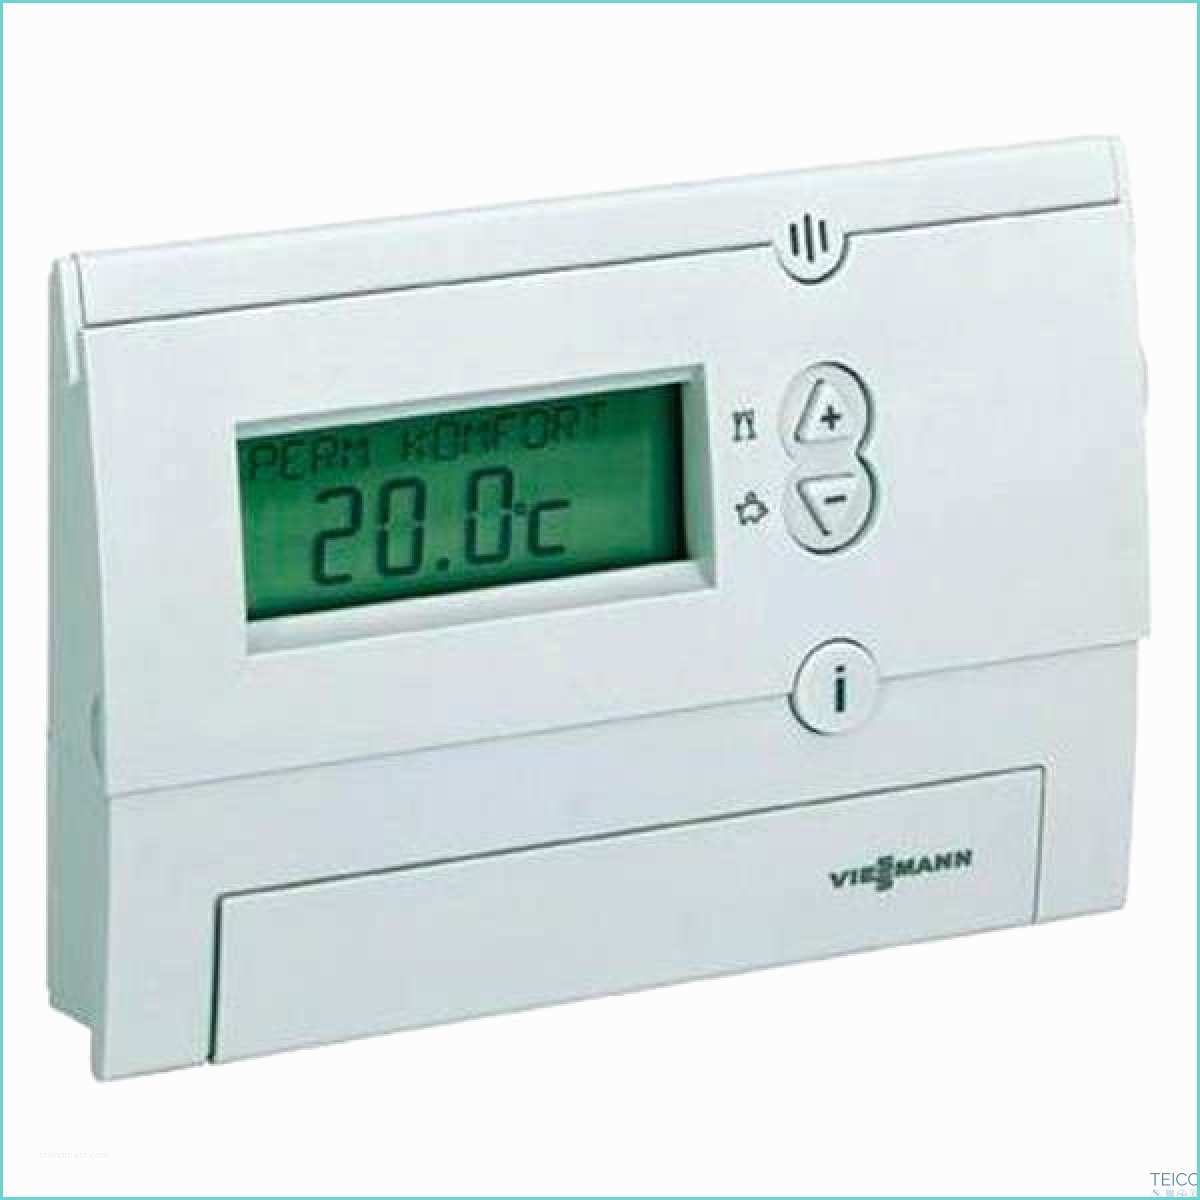 Thermostat Delta Dore Leroy Merlin thermostat D Ambiance thermostat D 39 Ambiance Filaire